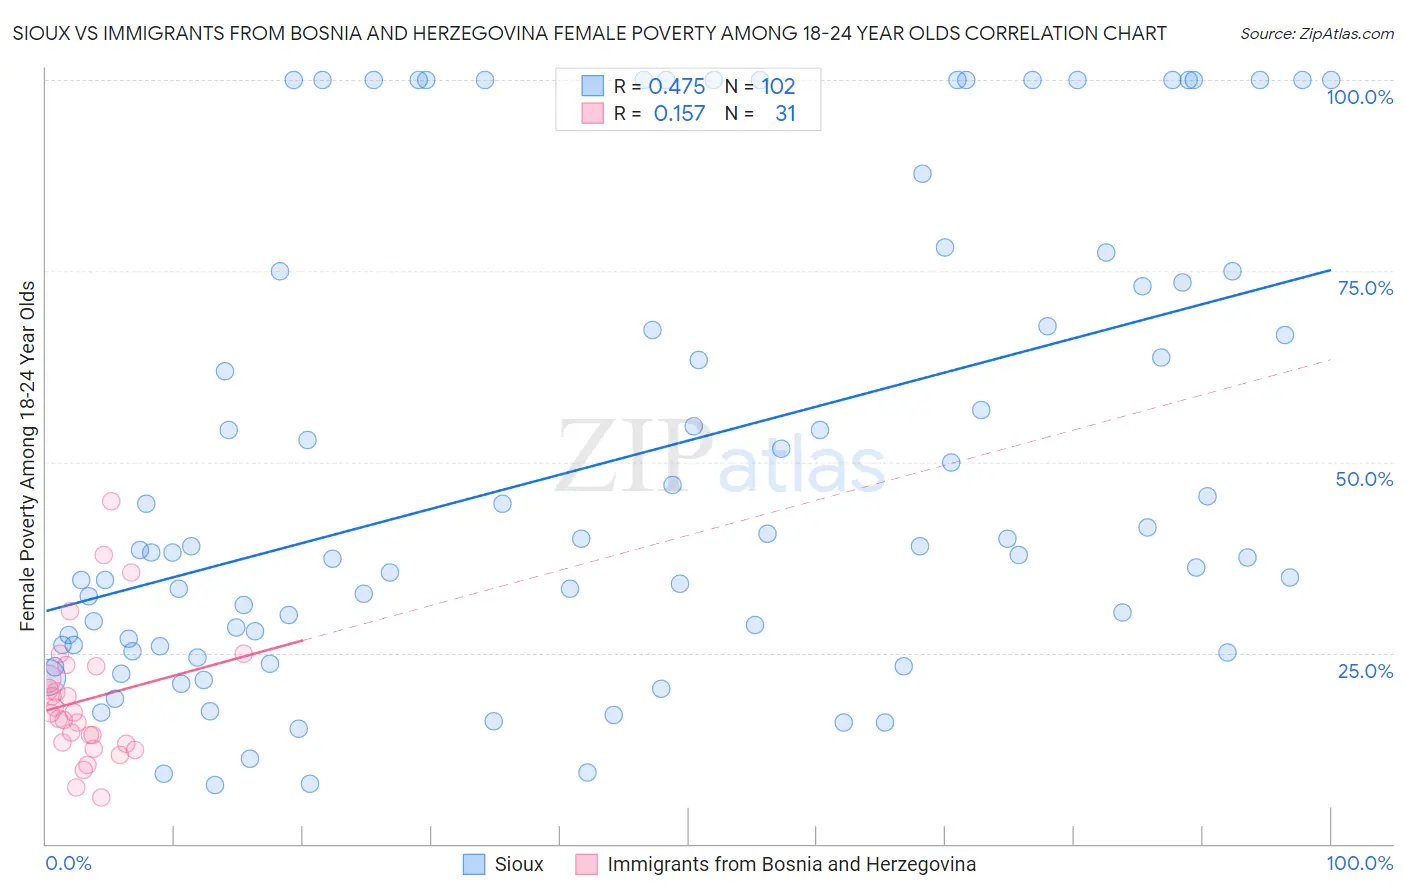 Sioux vs Immigrants from Bosnia and Herzegovina Female Poverty Among 18-24 Year Olds